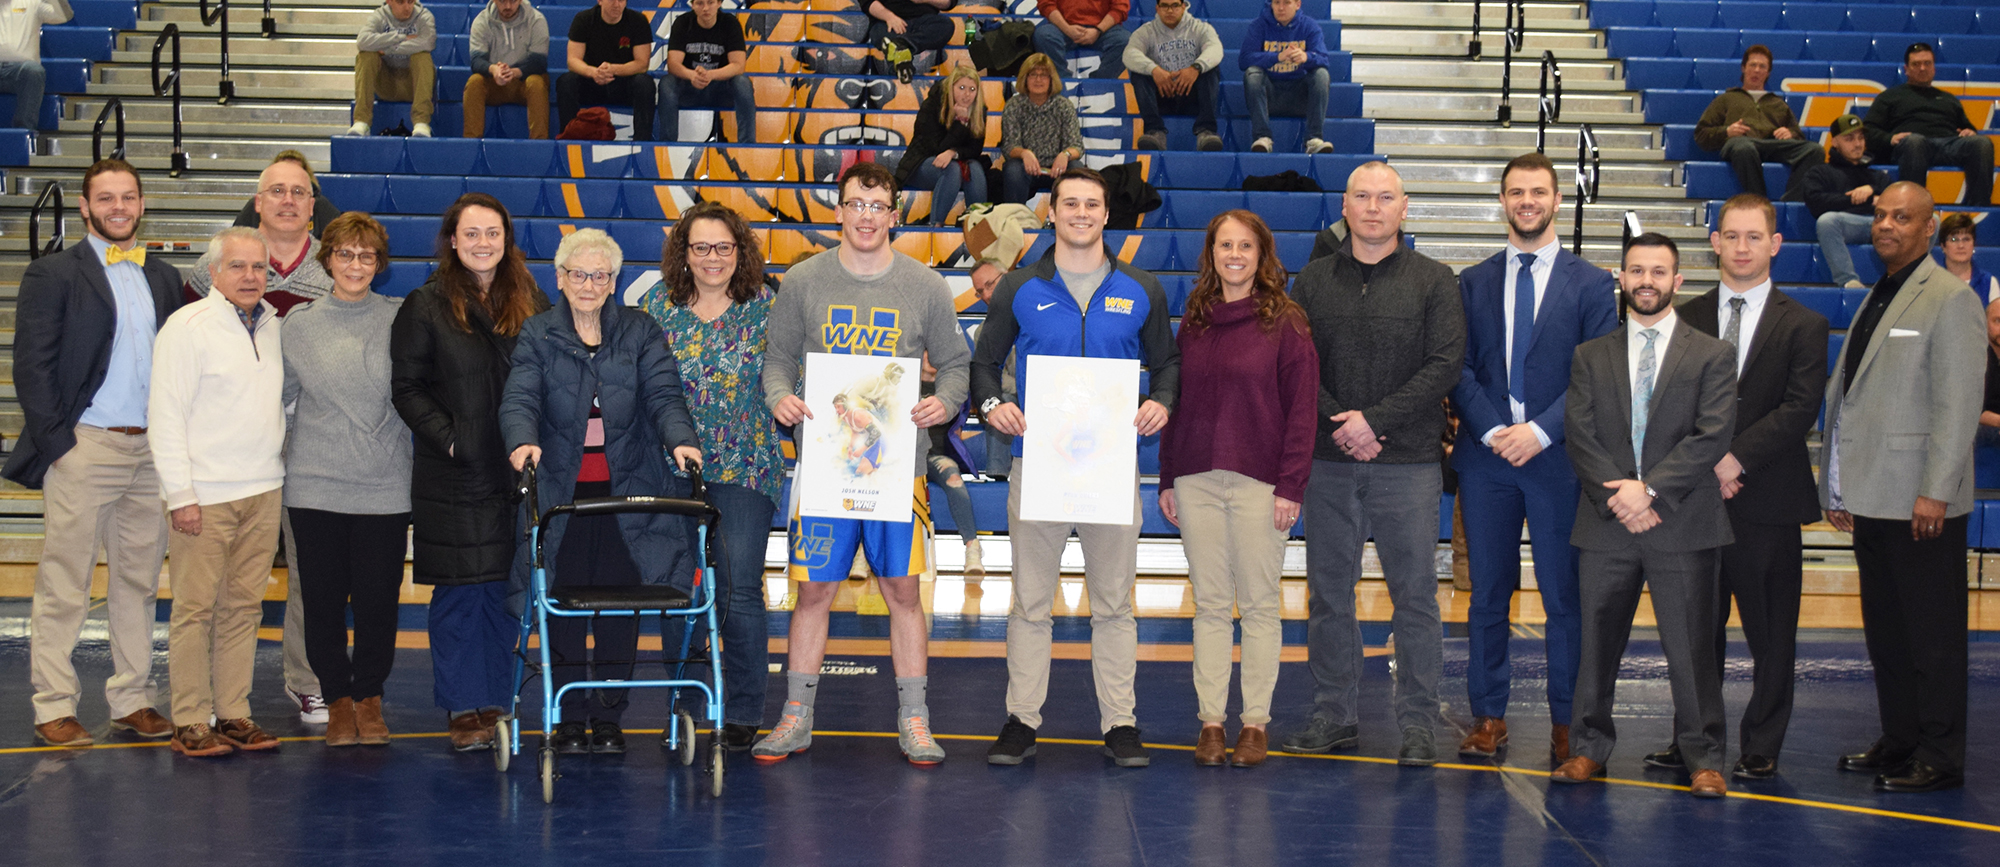 Golden Bears Defeat Plymouth State on Senior Day, 37-3